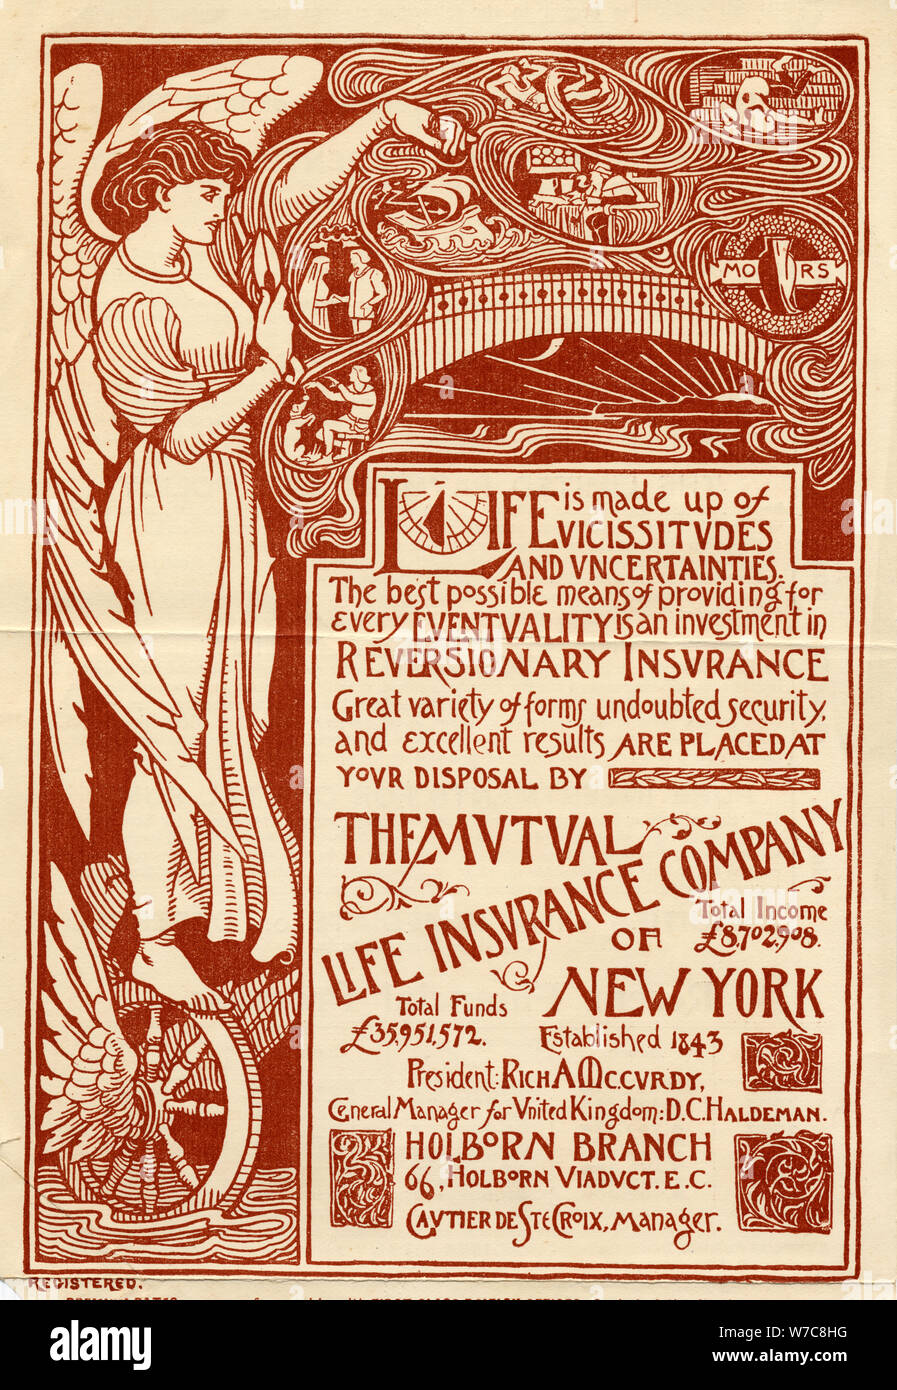 The Mutual Life Insurance Company of New York, 19th century. Artist: Unknown Stock Photo